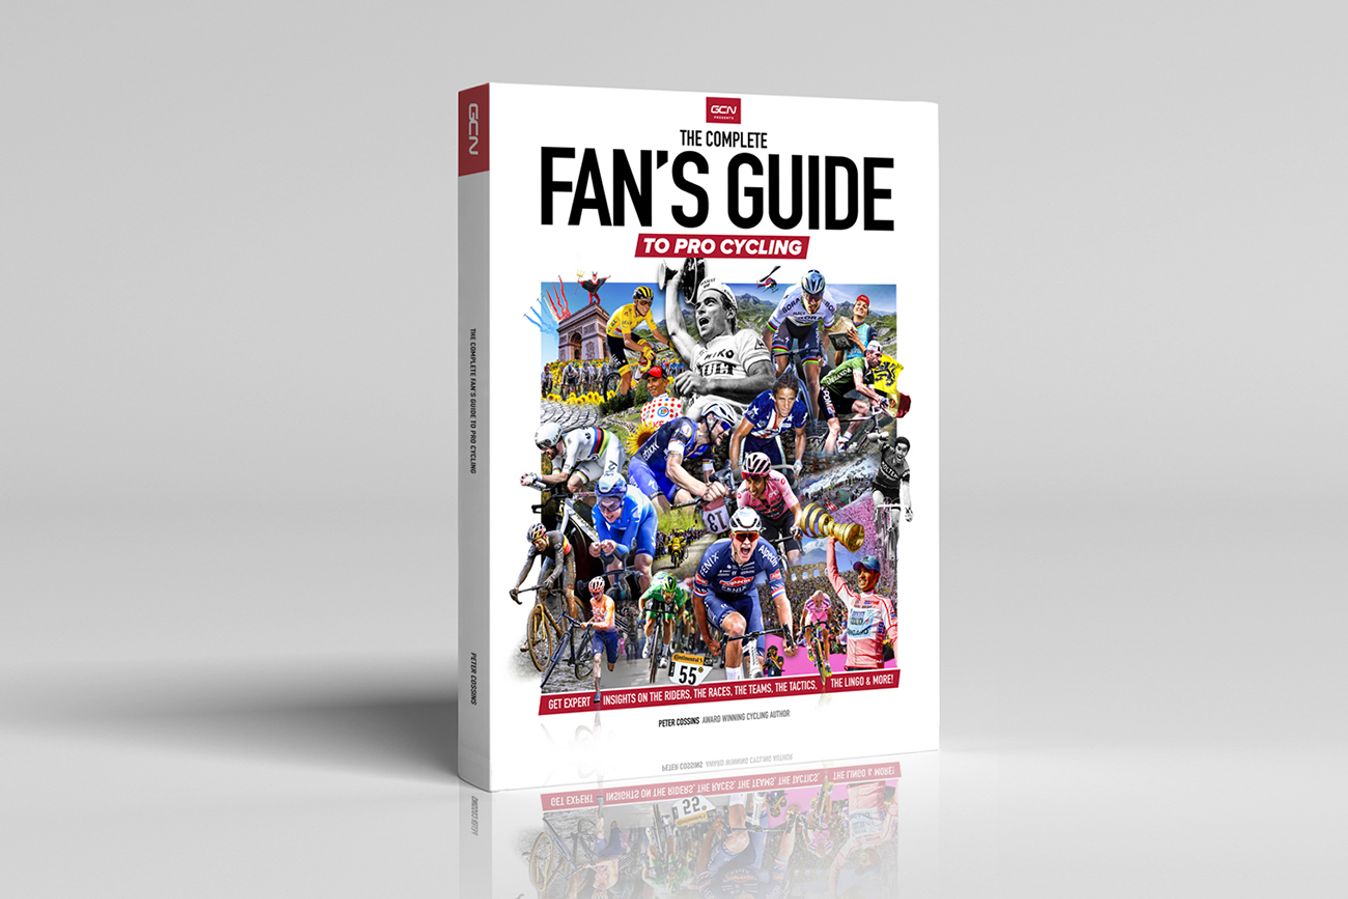 The Complete Fan’s Guide To Pro Cycling